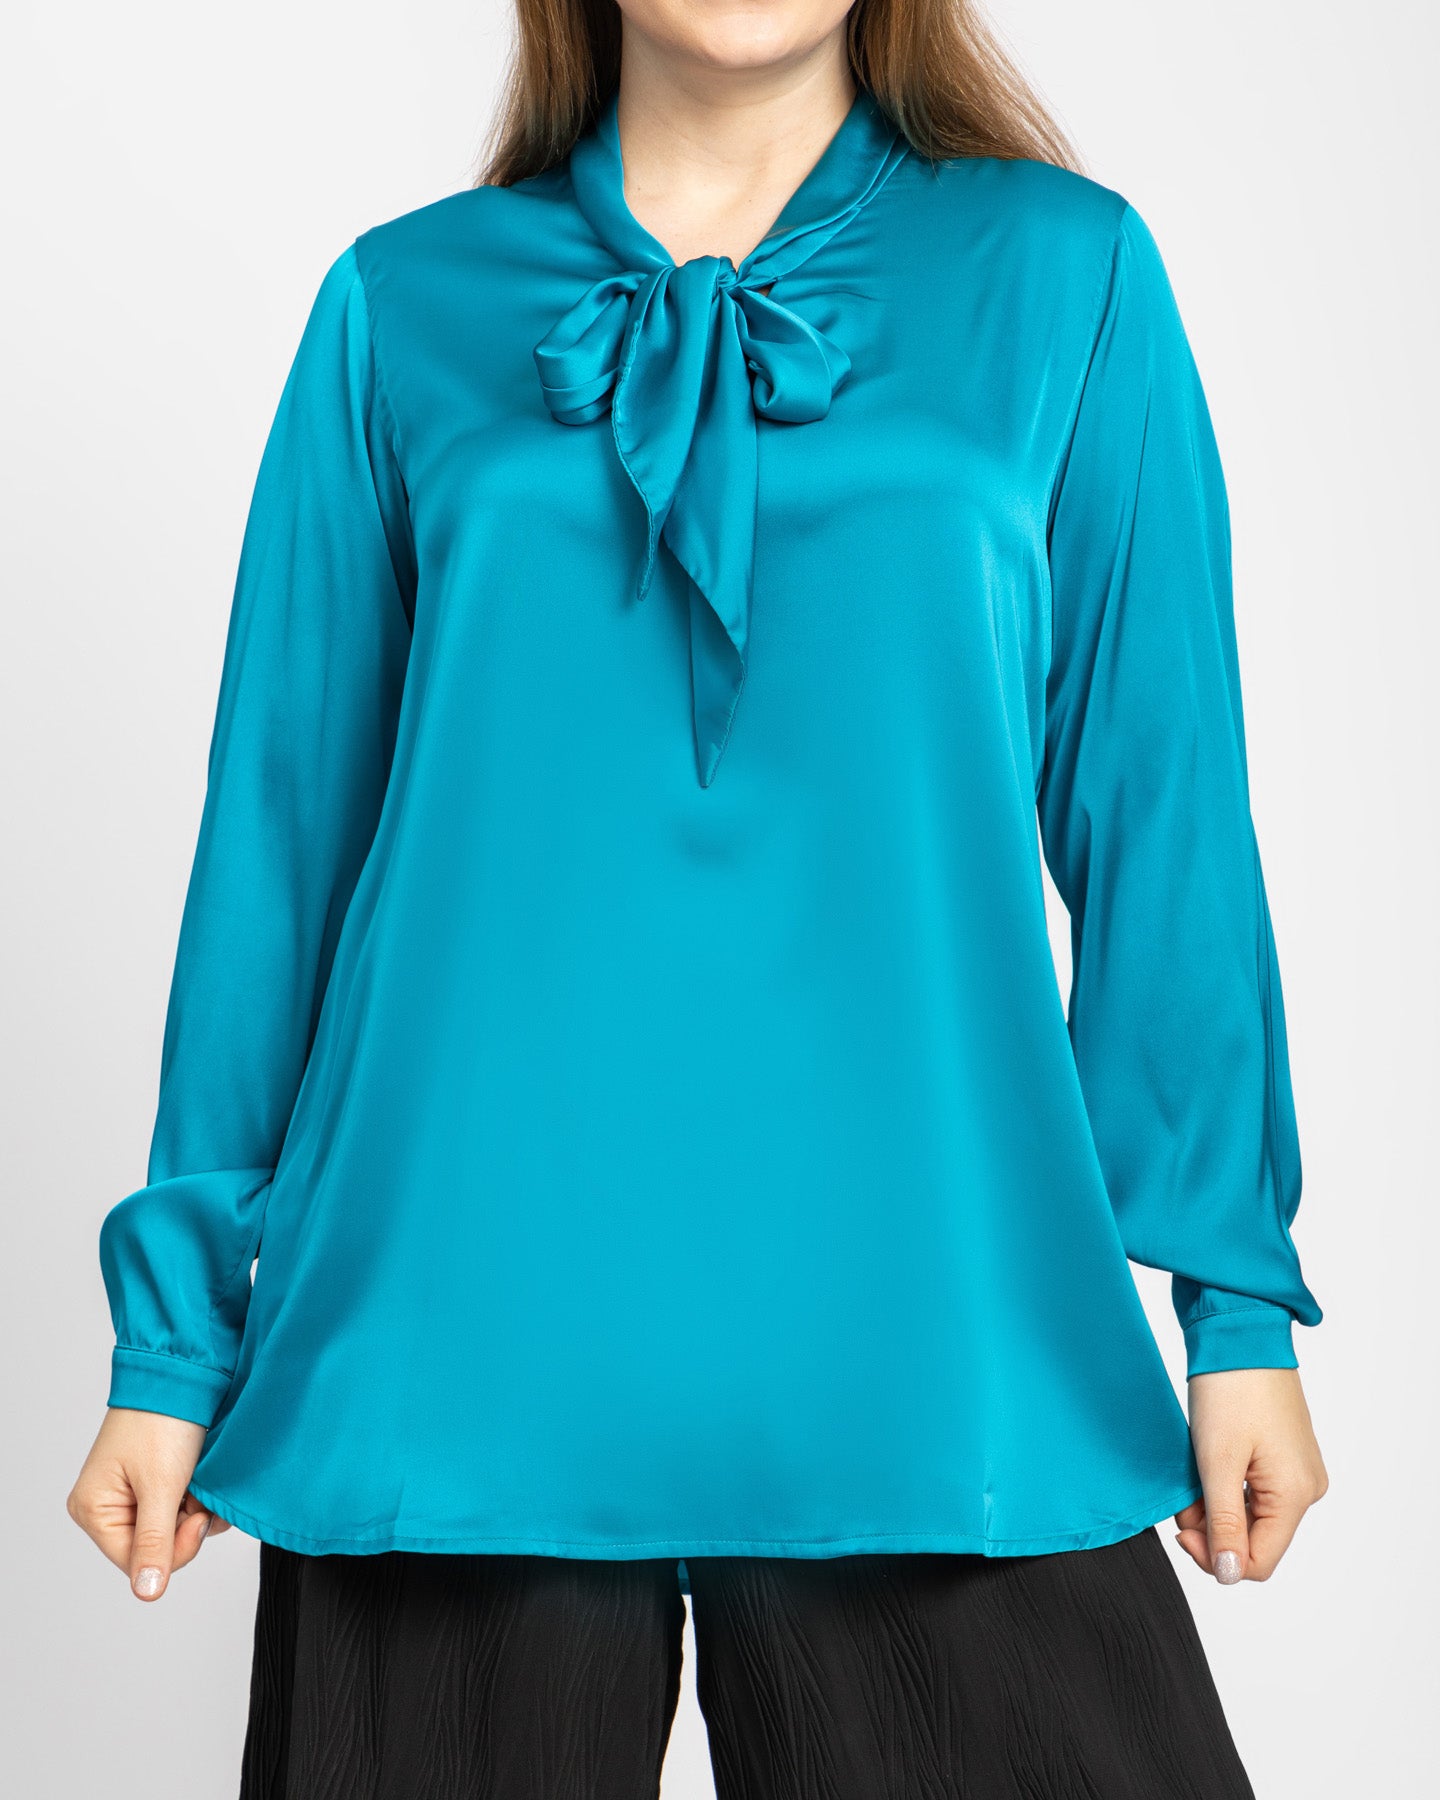 BASIC EVERYDAY SATIN BLOUSE WITH A BOW COLLAR